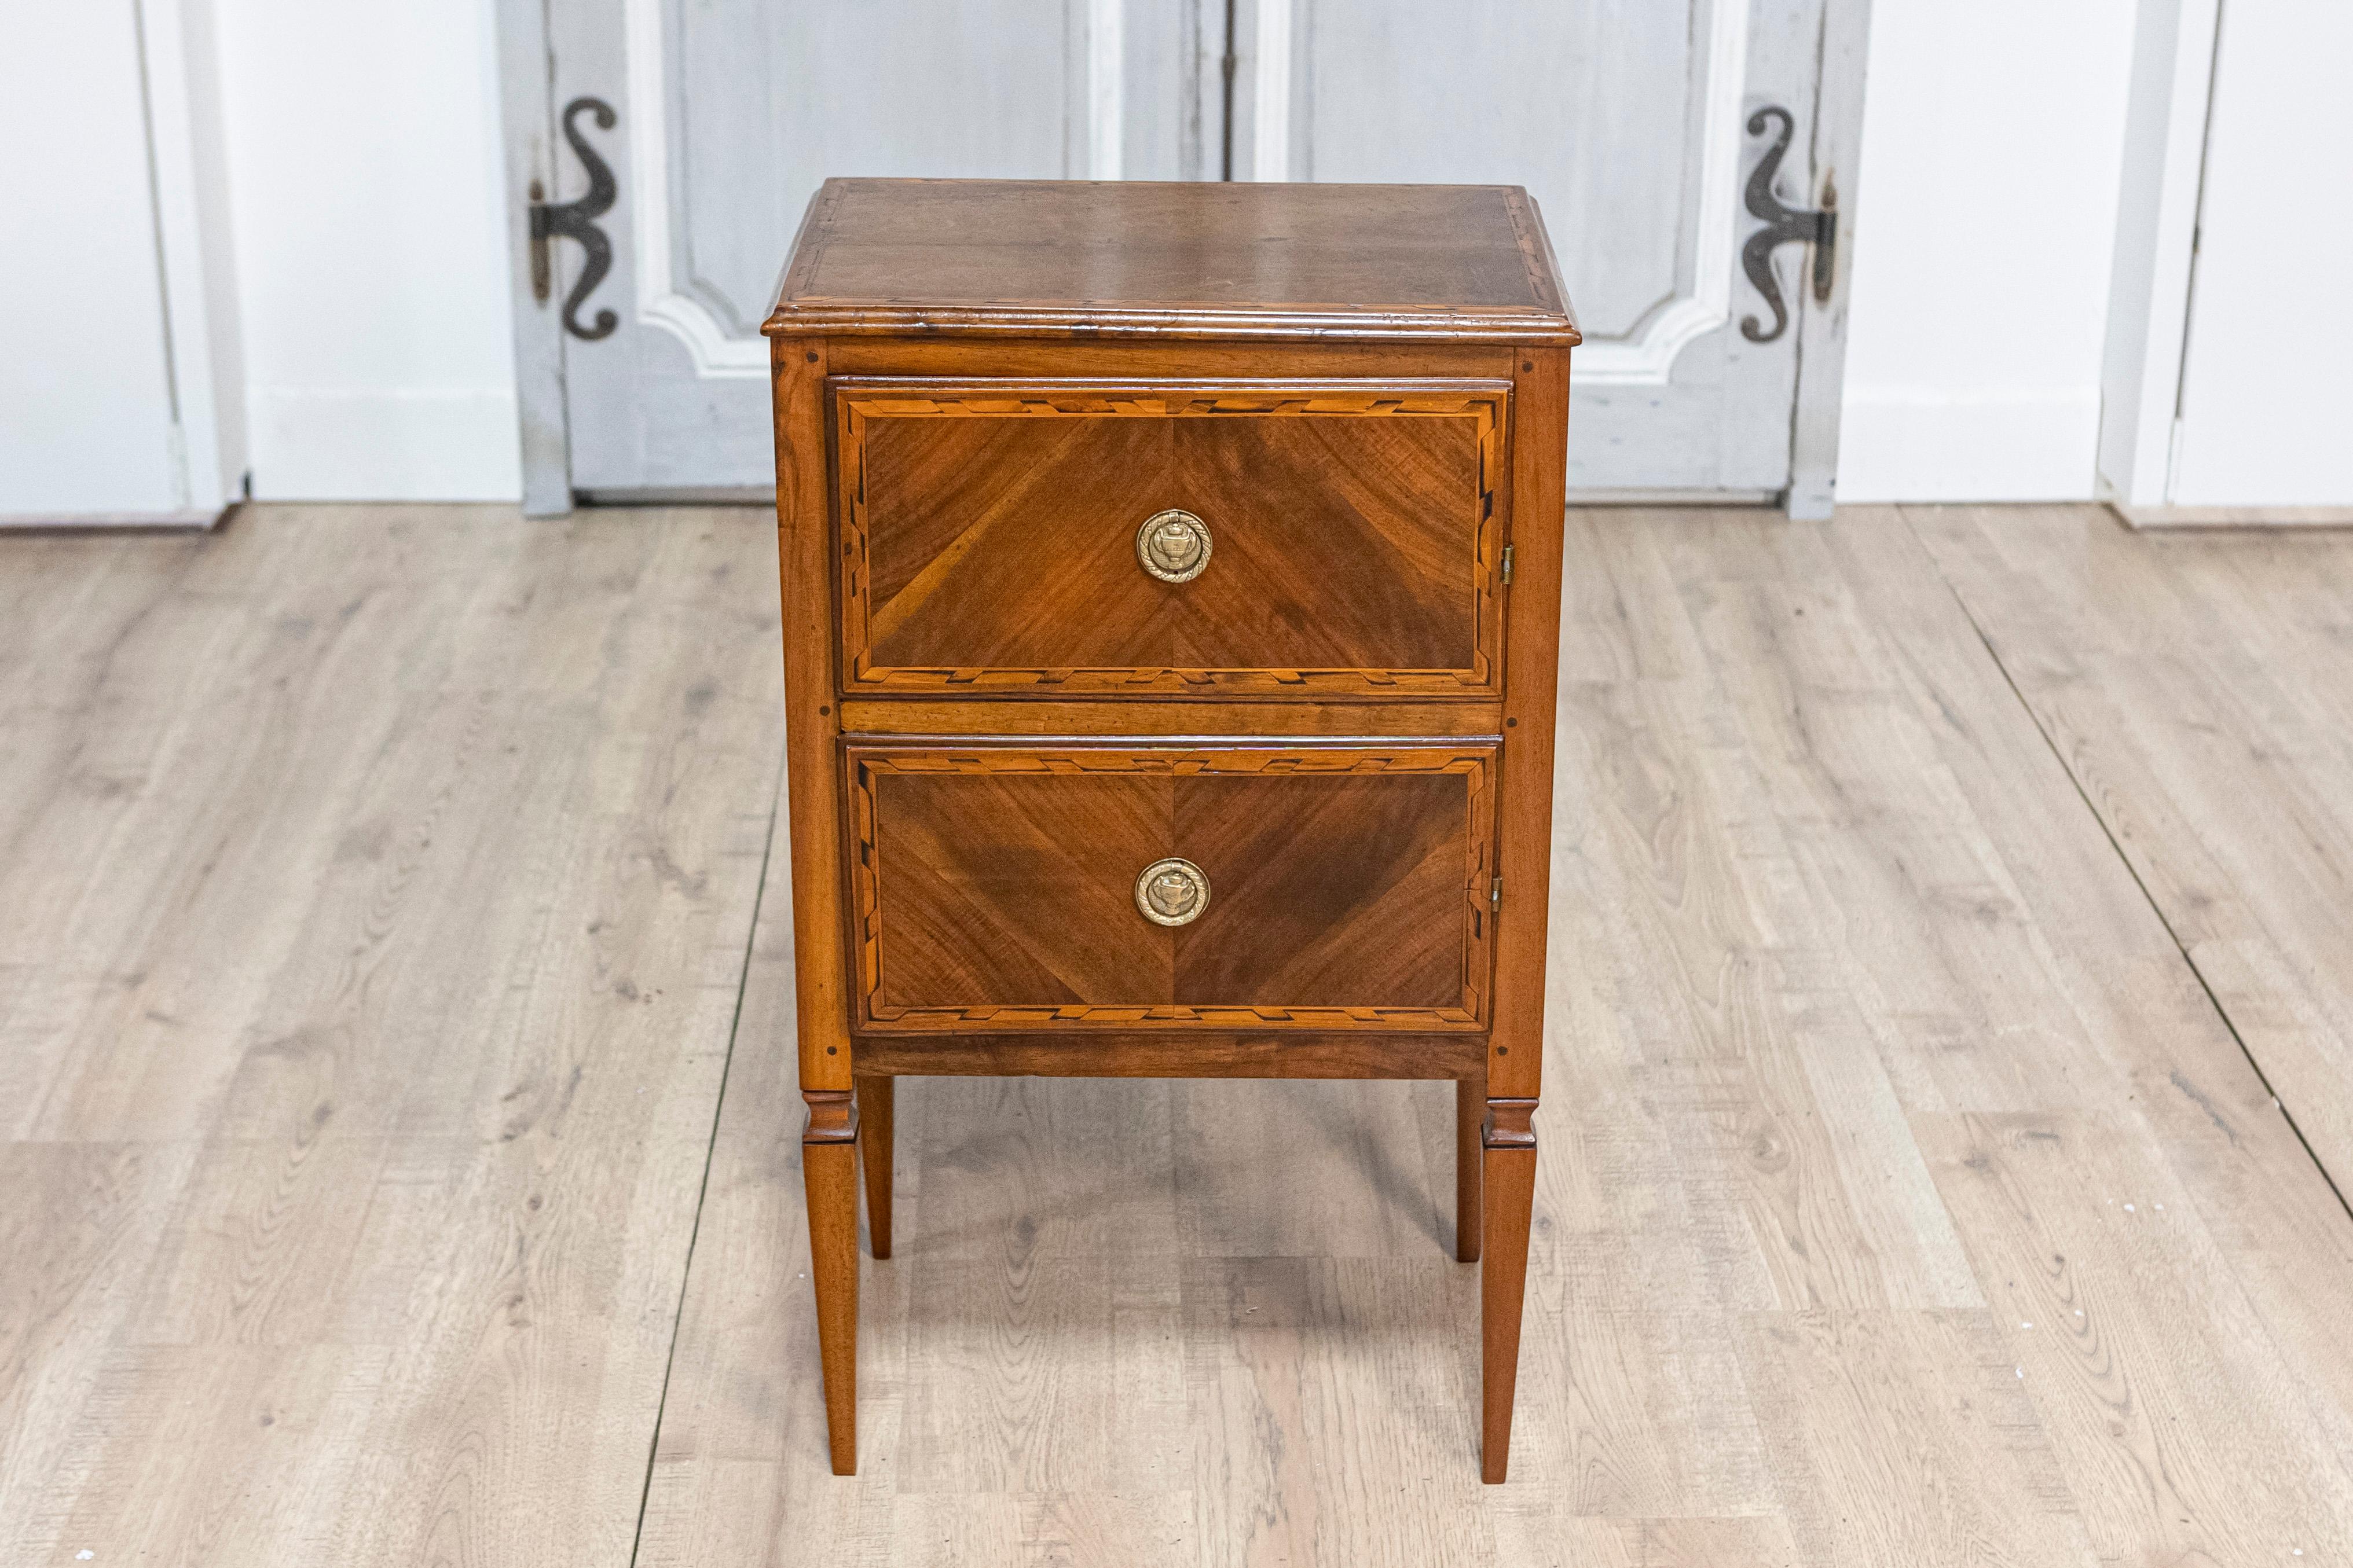 Pair of Italian Neoclassical Style Walnut Nightstands with Bookmatched Veneer In Good Condition For Sale In Atlanta, GA